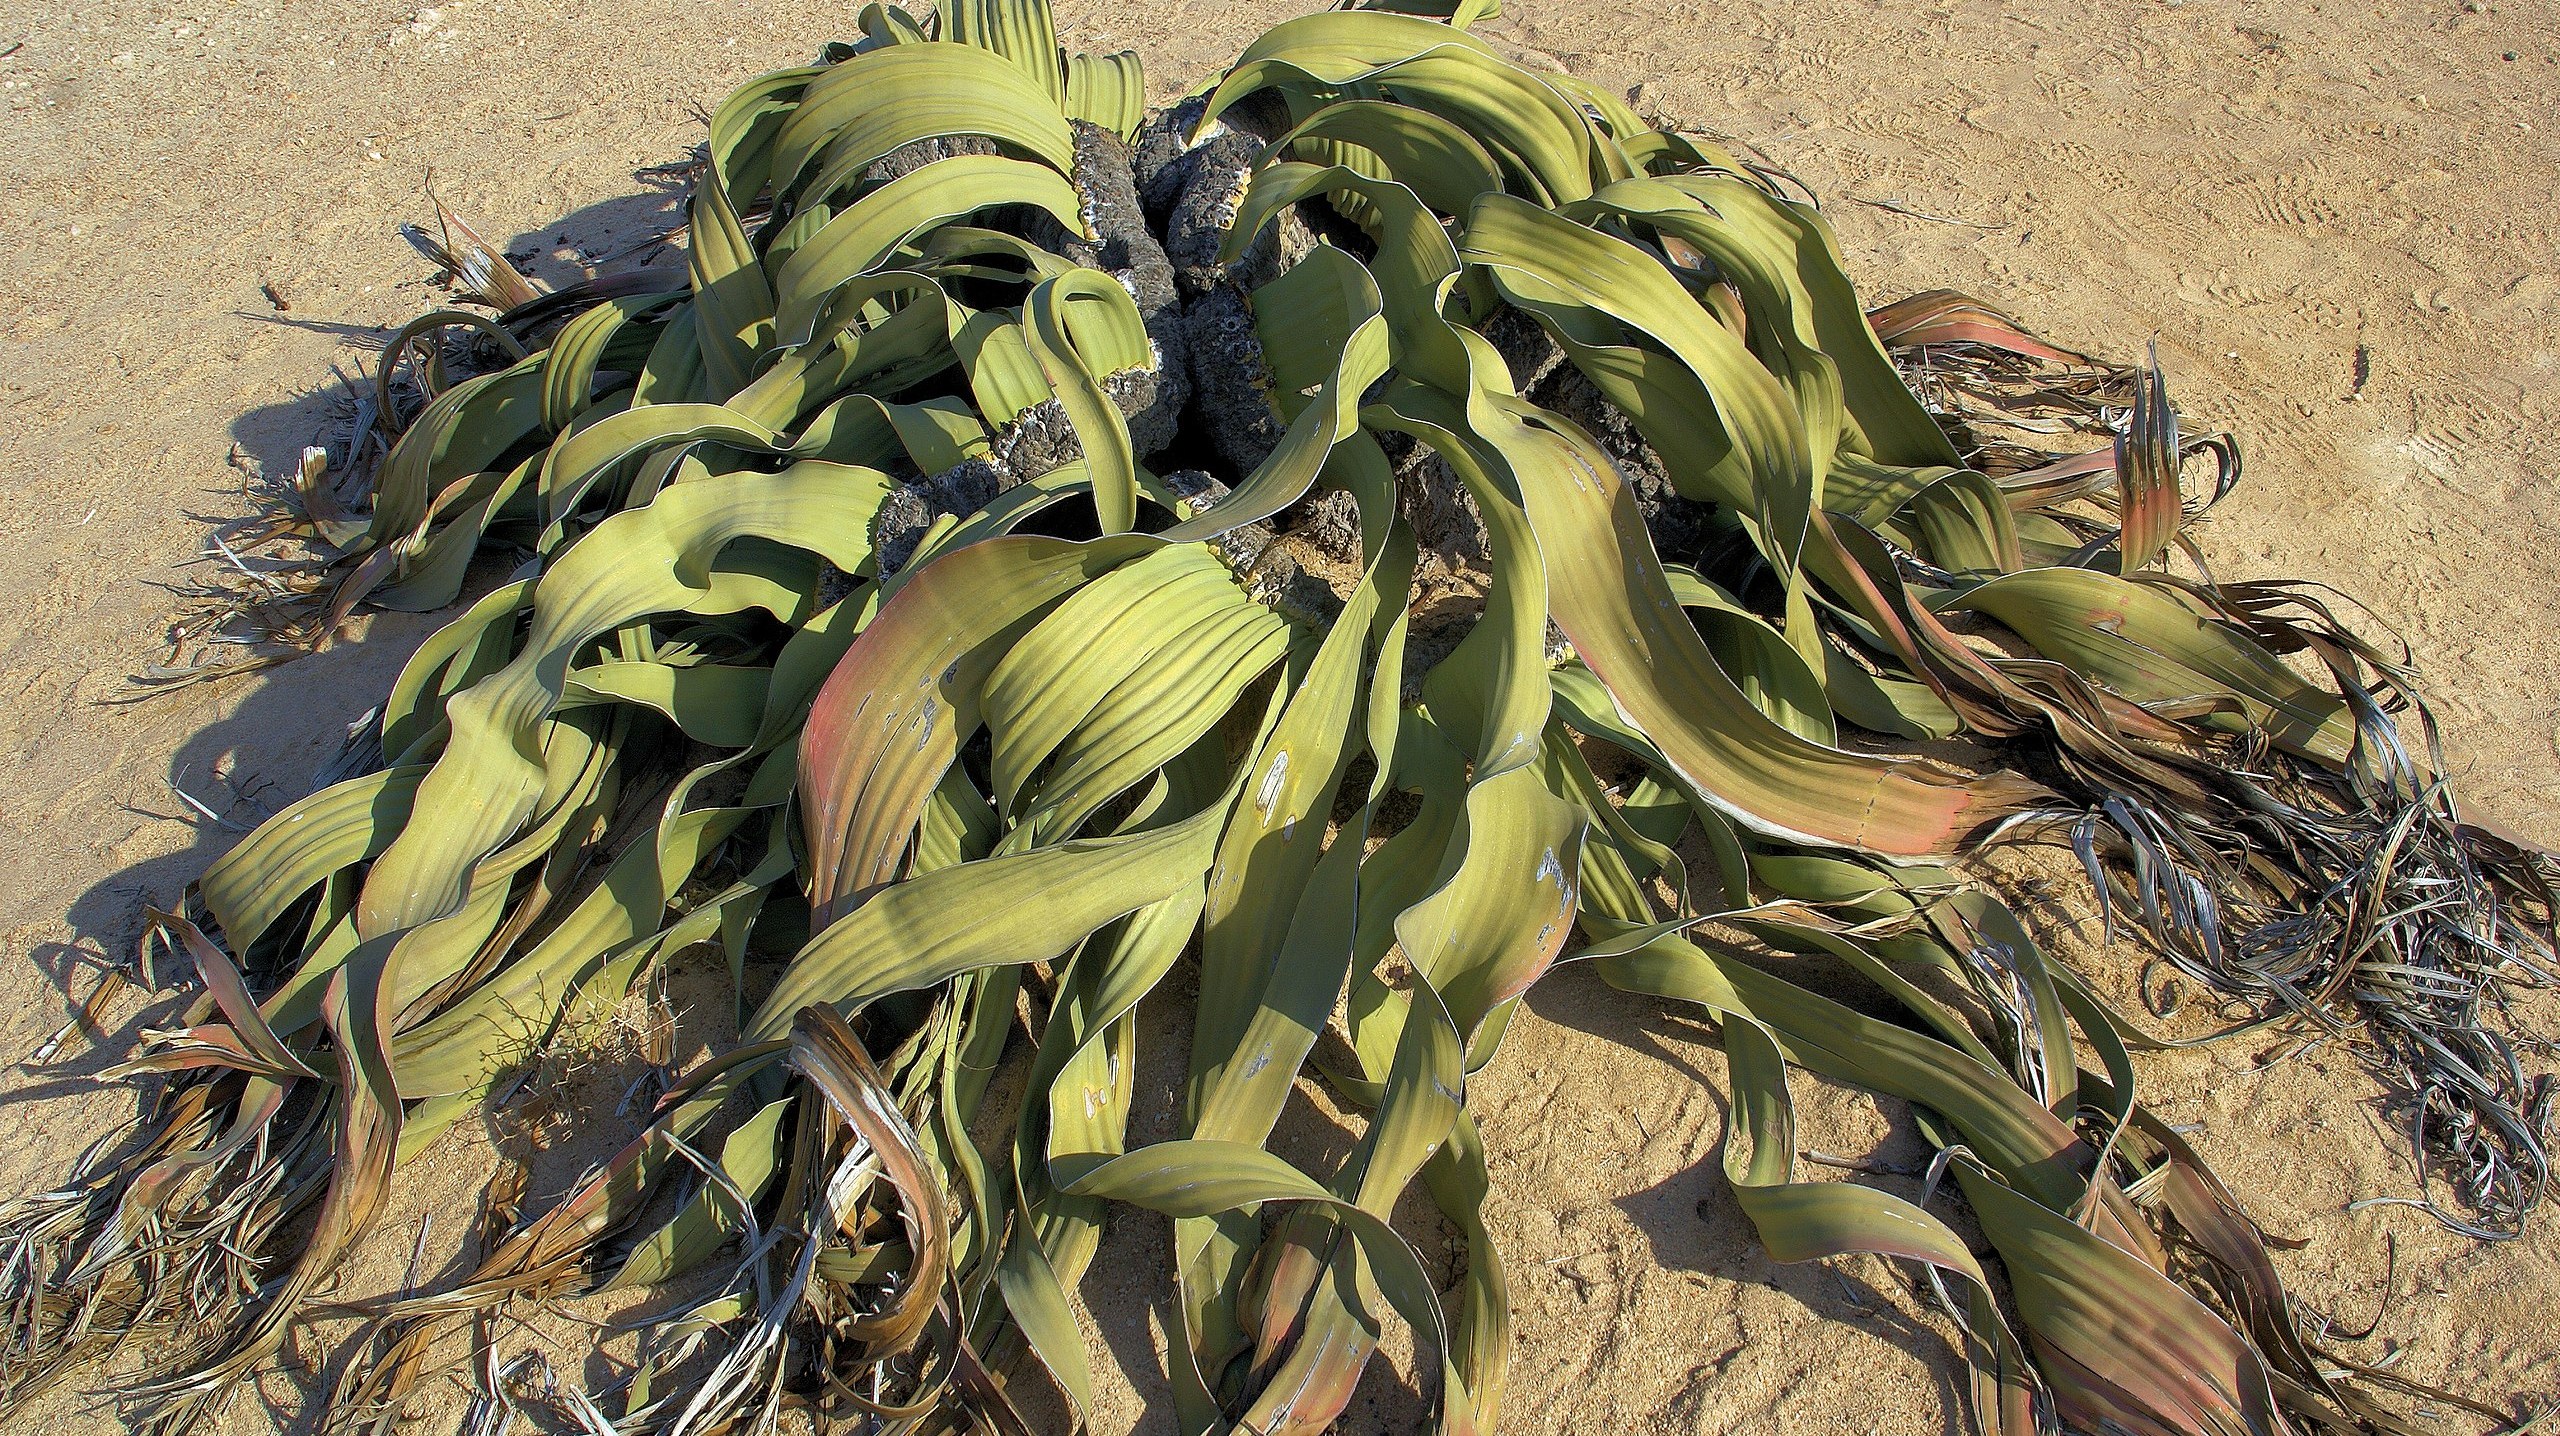 Straggly green plant with long curly leaves in a sandy desert